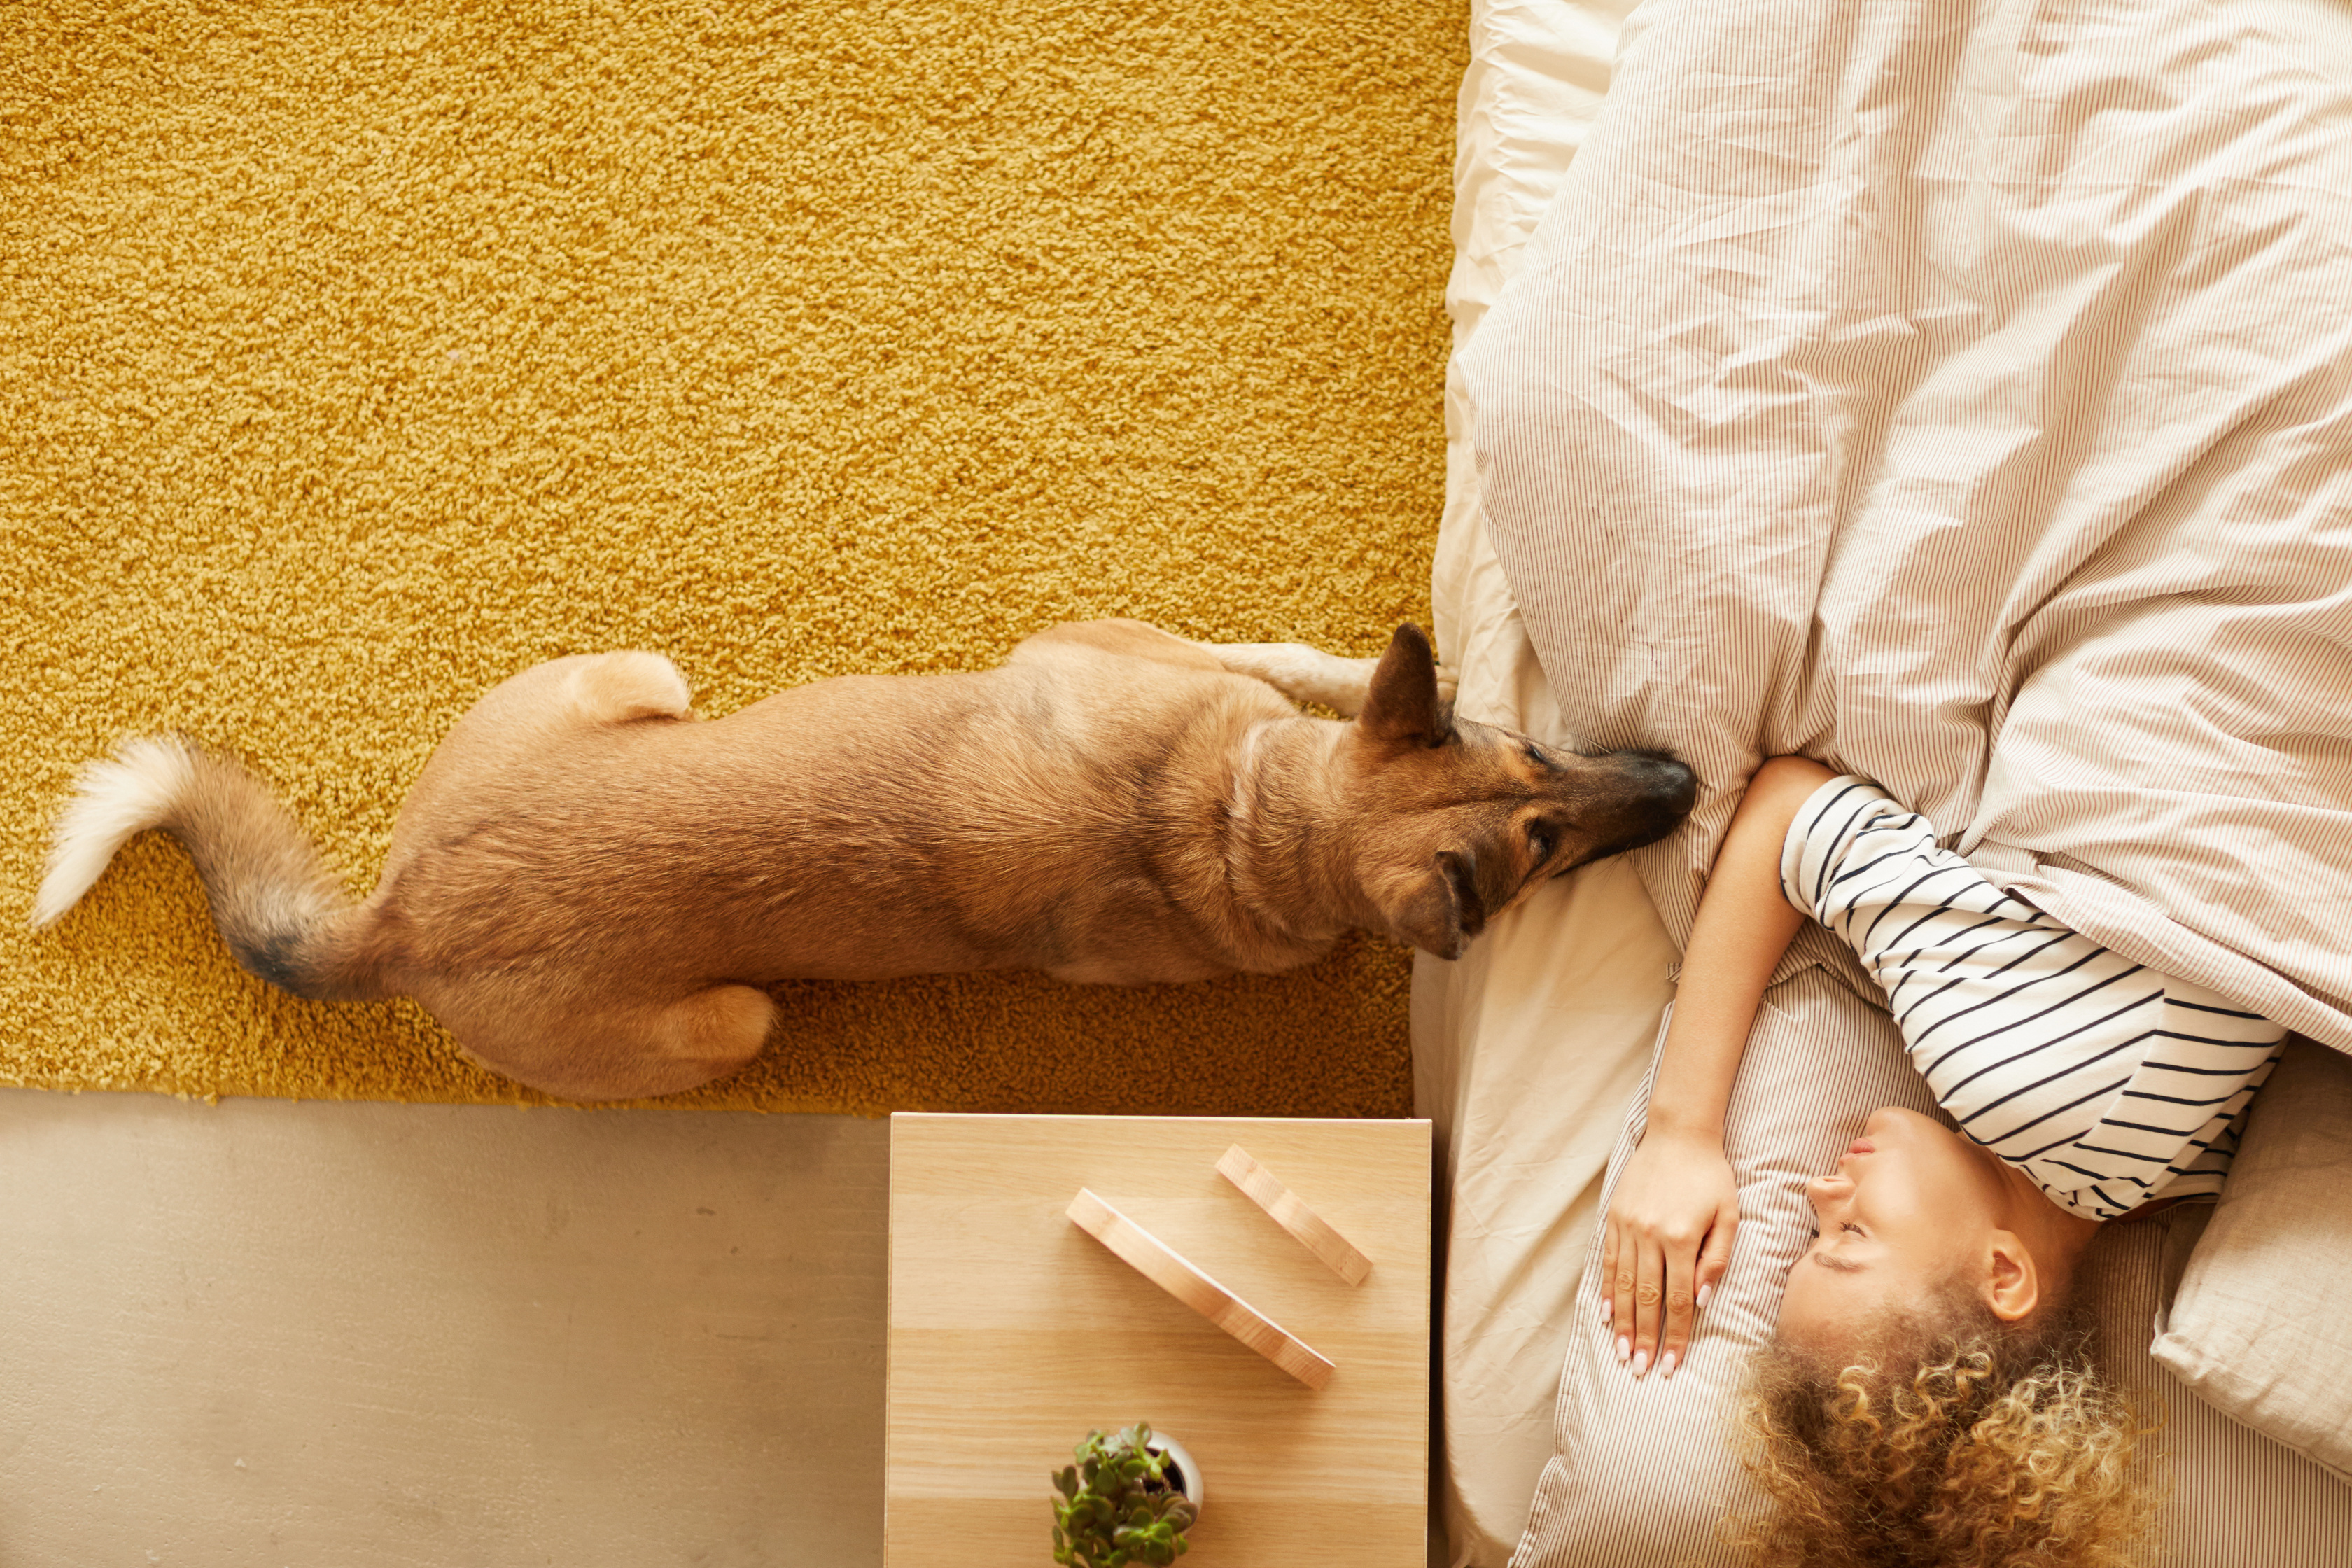 a dog laying on a bed next to a sleeping woman

Are you or a loved one struggling to maintain activities of daily living (ADLs)?